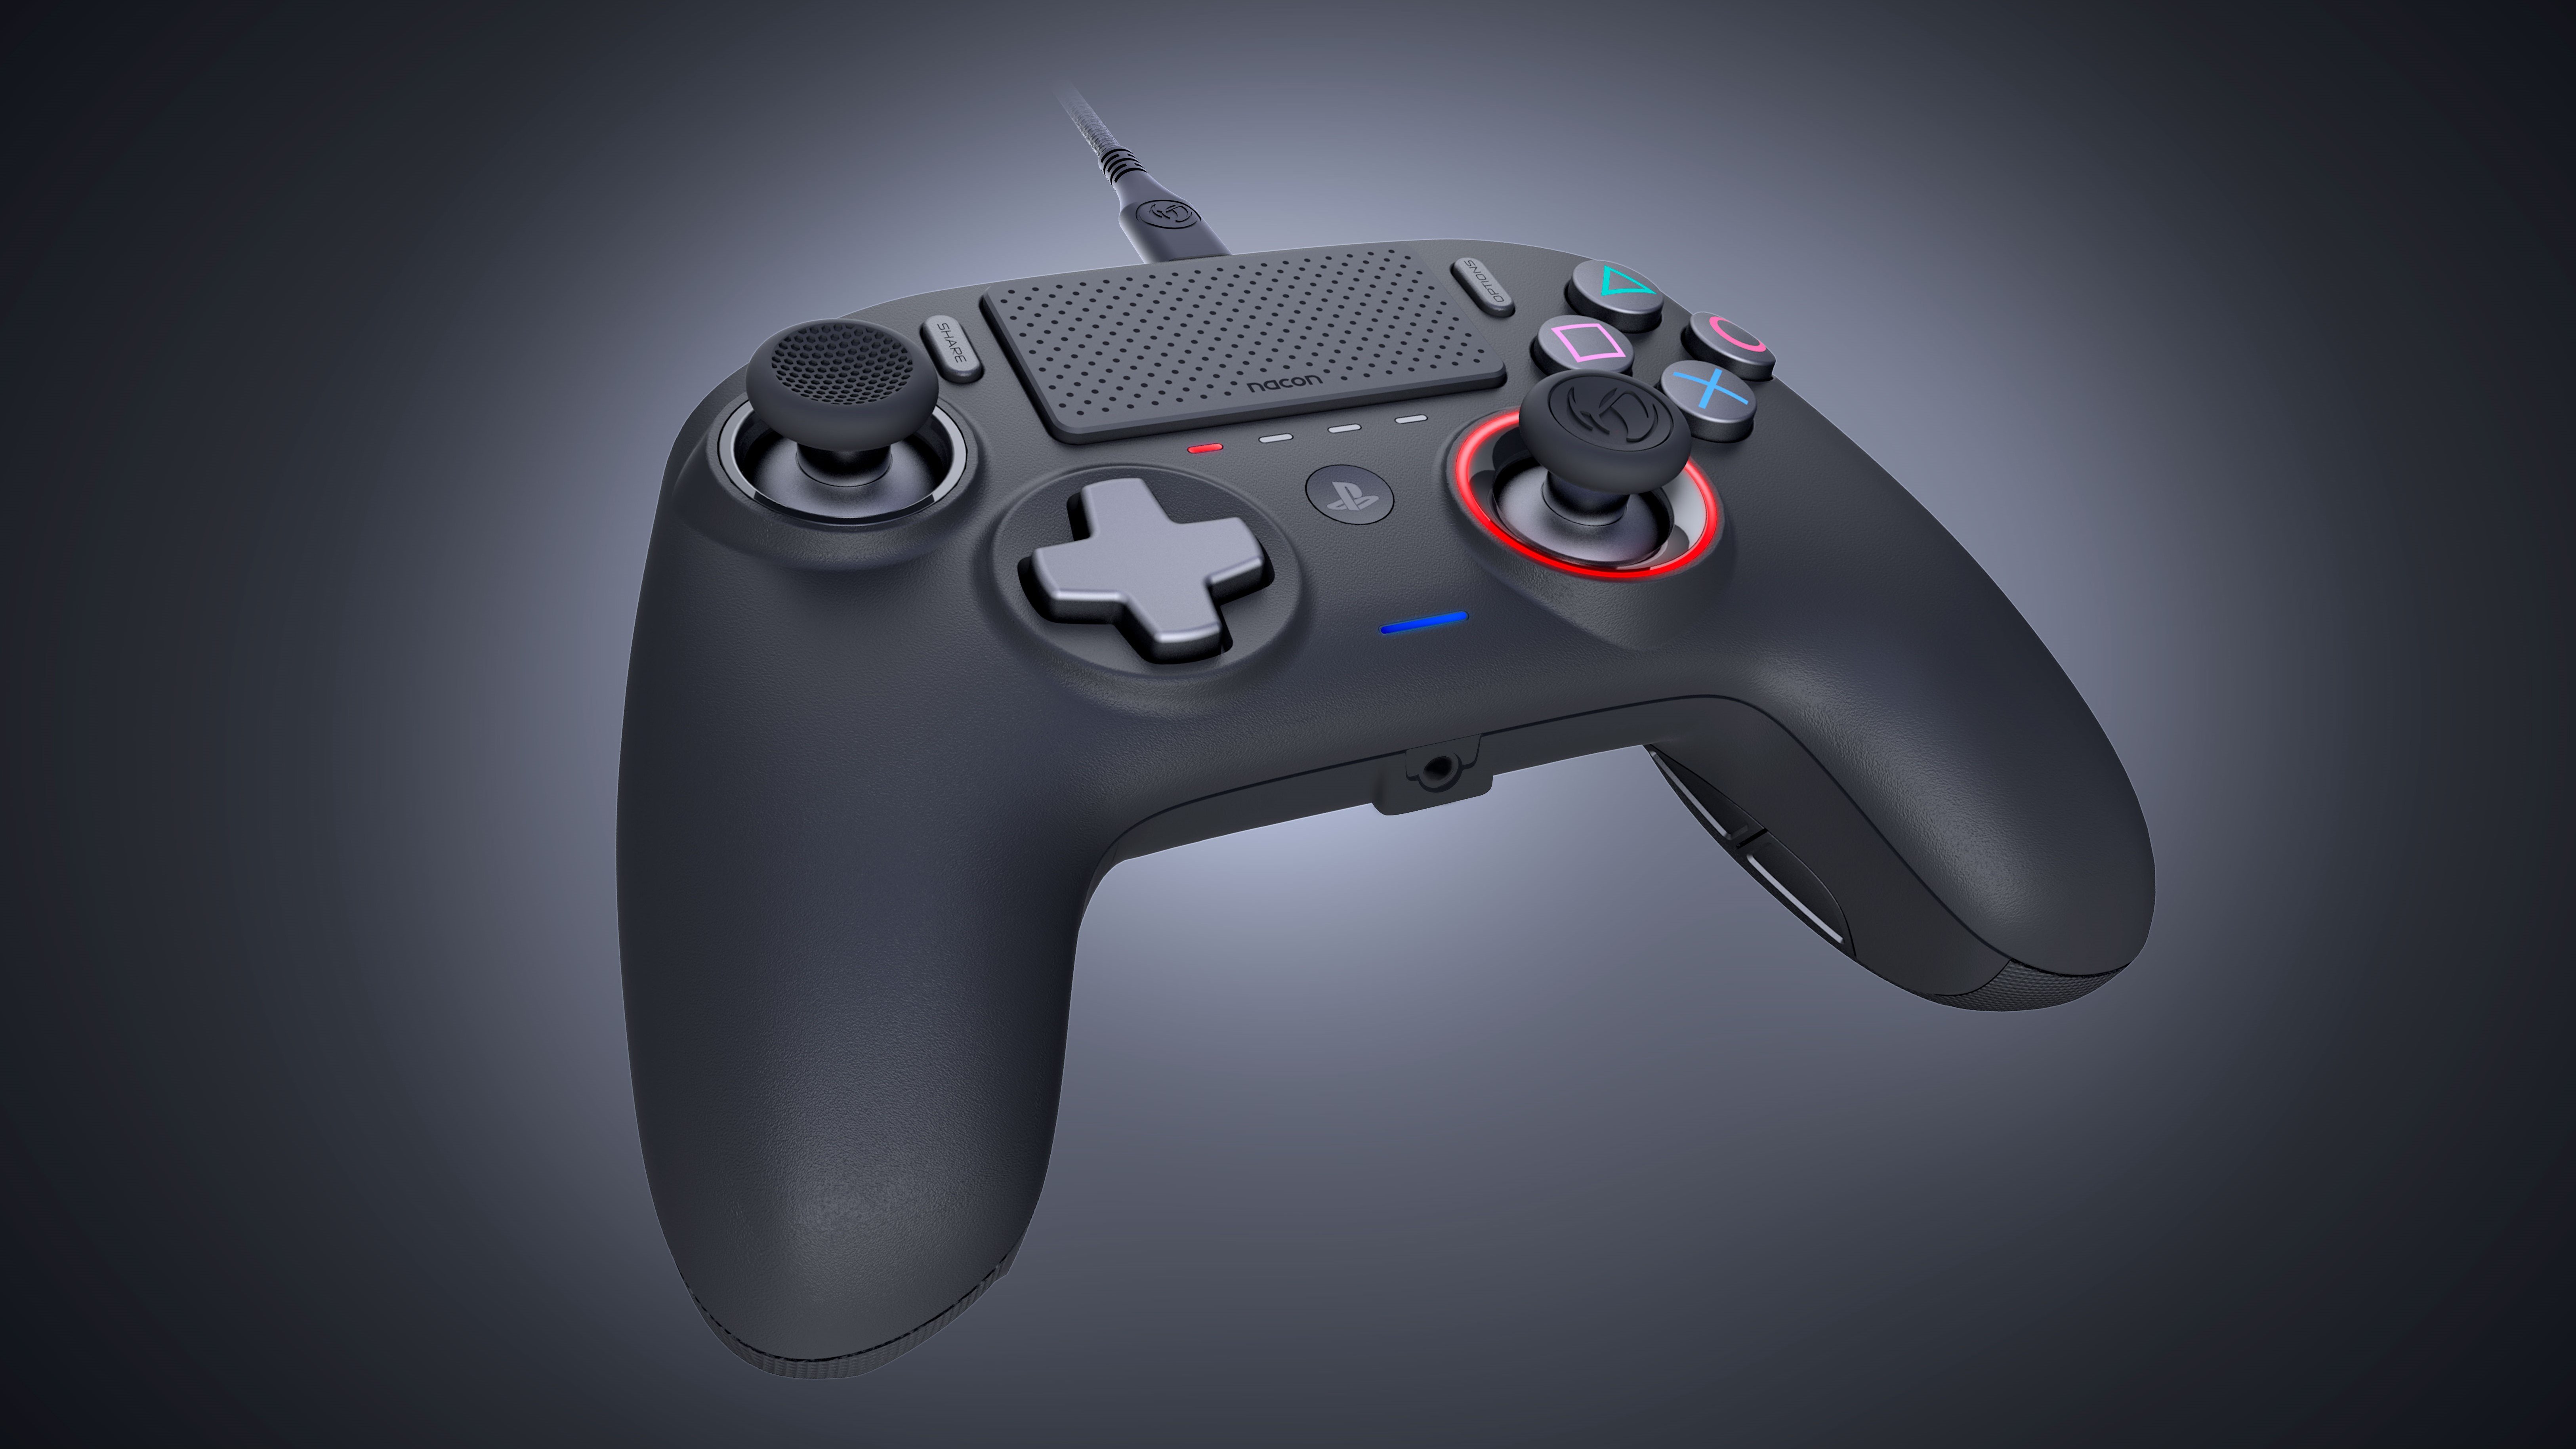 Another Officially Licensed Pro Ps4 Controller From Nacon Launches Next Month Push Square